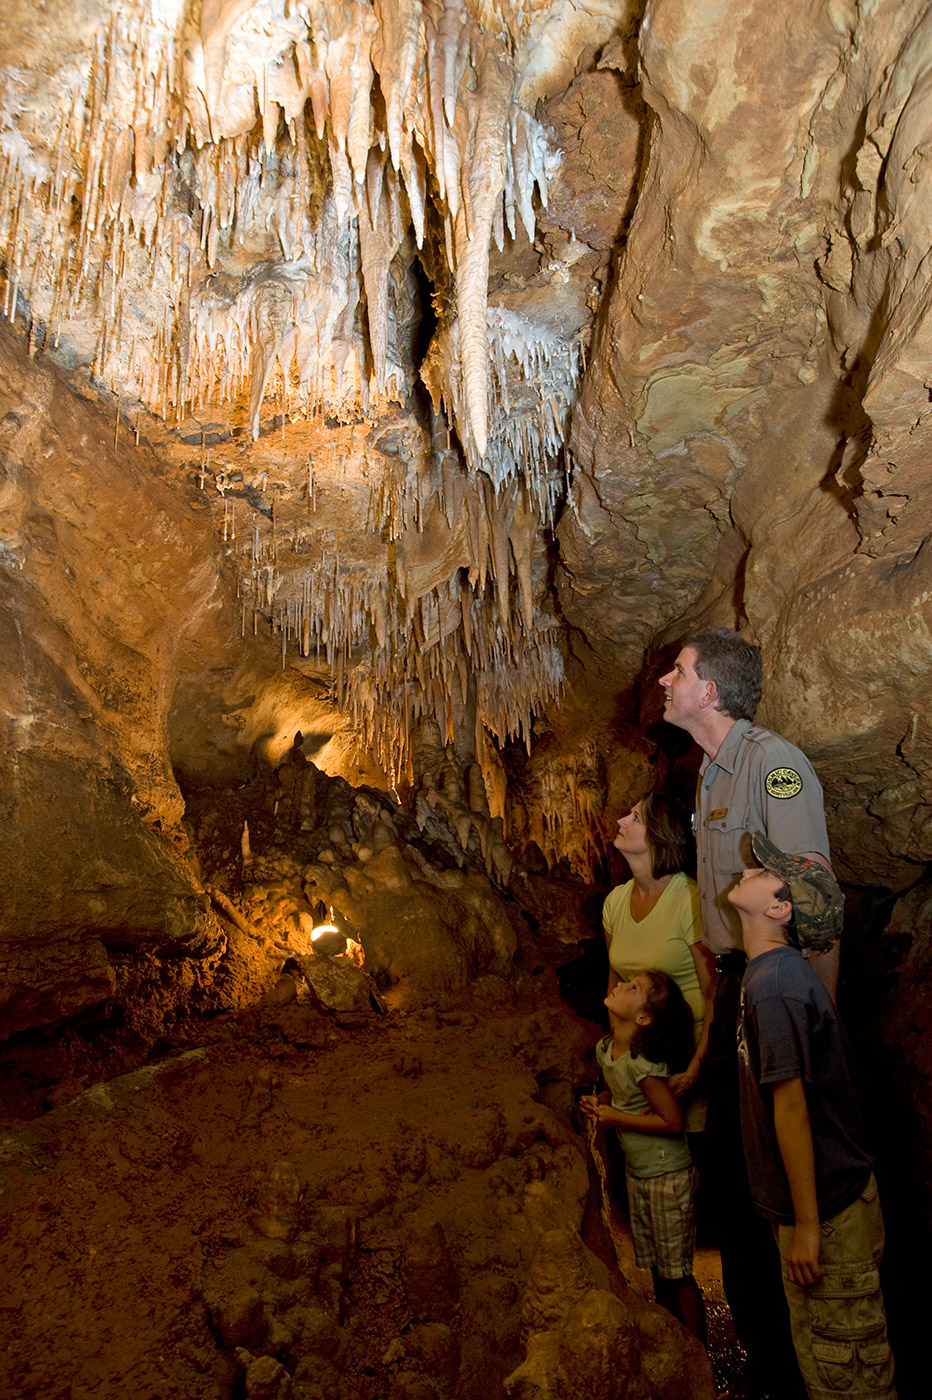 White park ranger and white woman and children marveling inside a deep cave with stalactites hanging from above